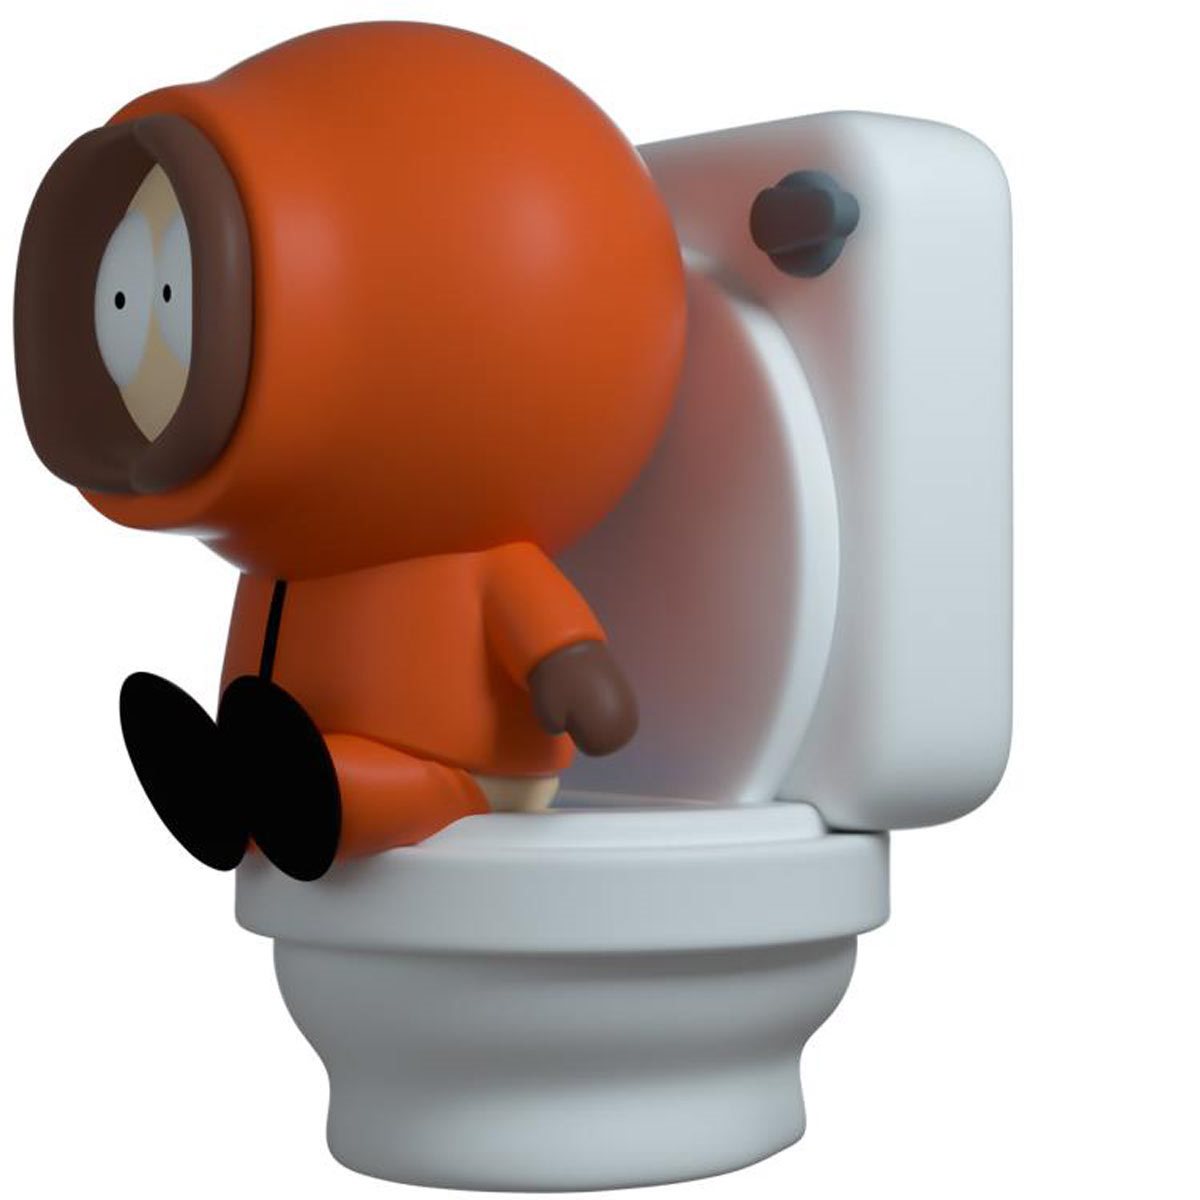 South Collection Kenny on Toilet Figure #5